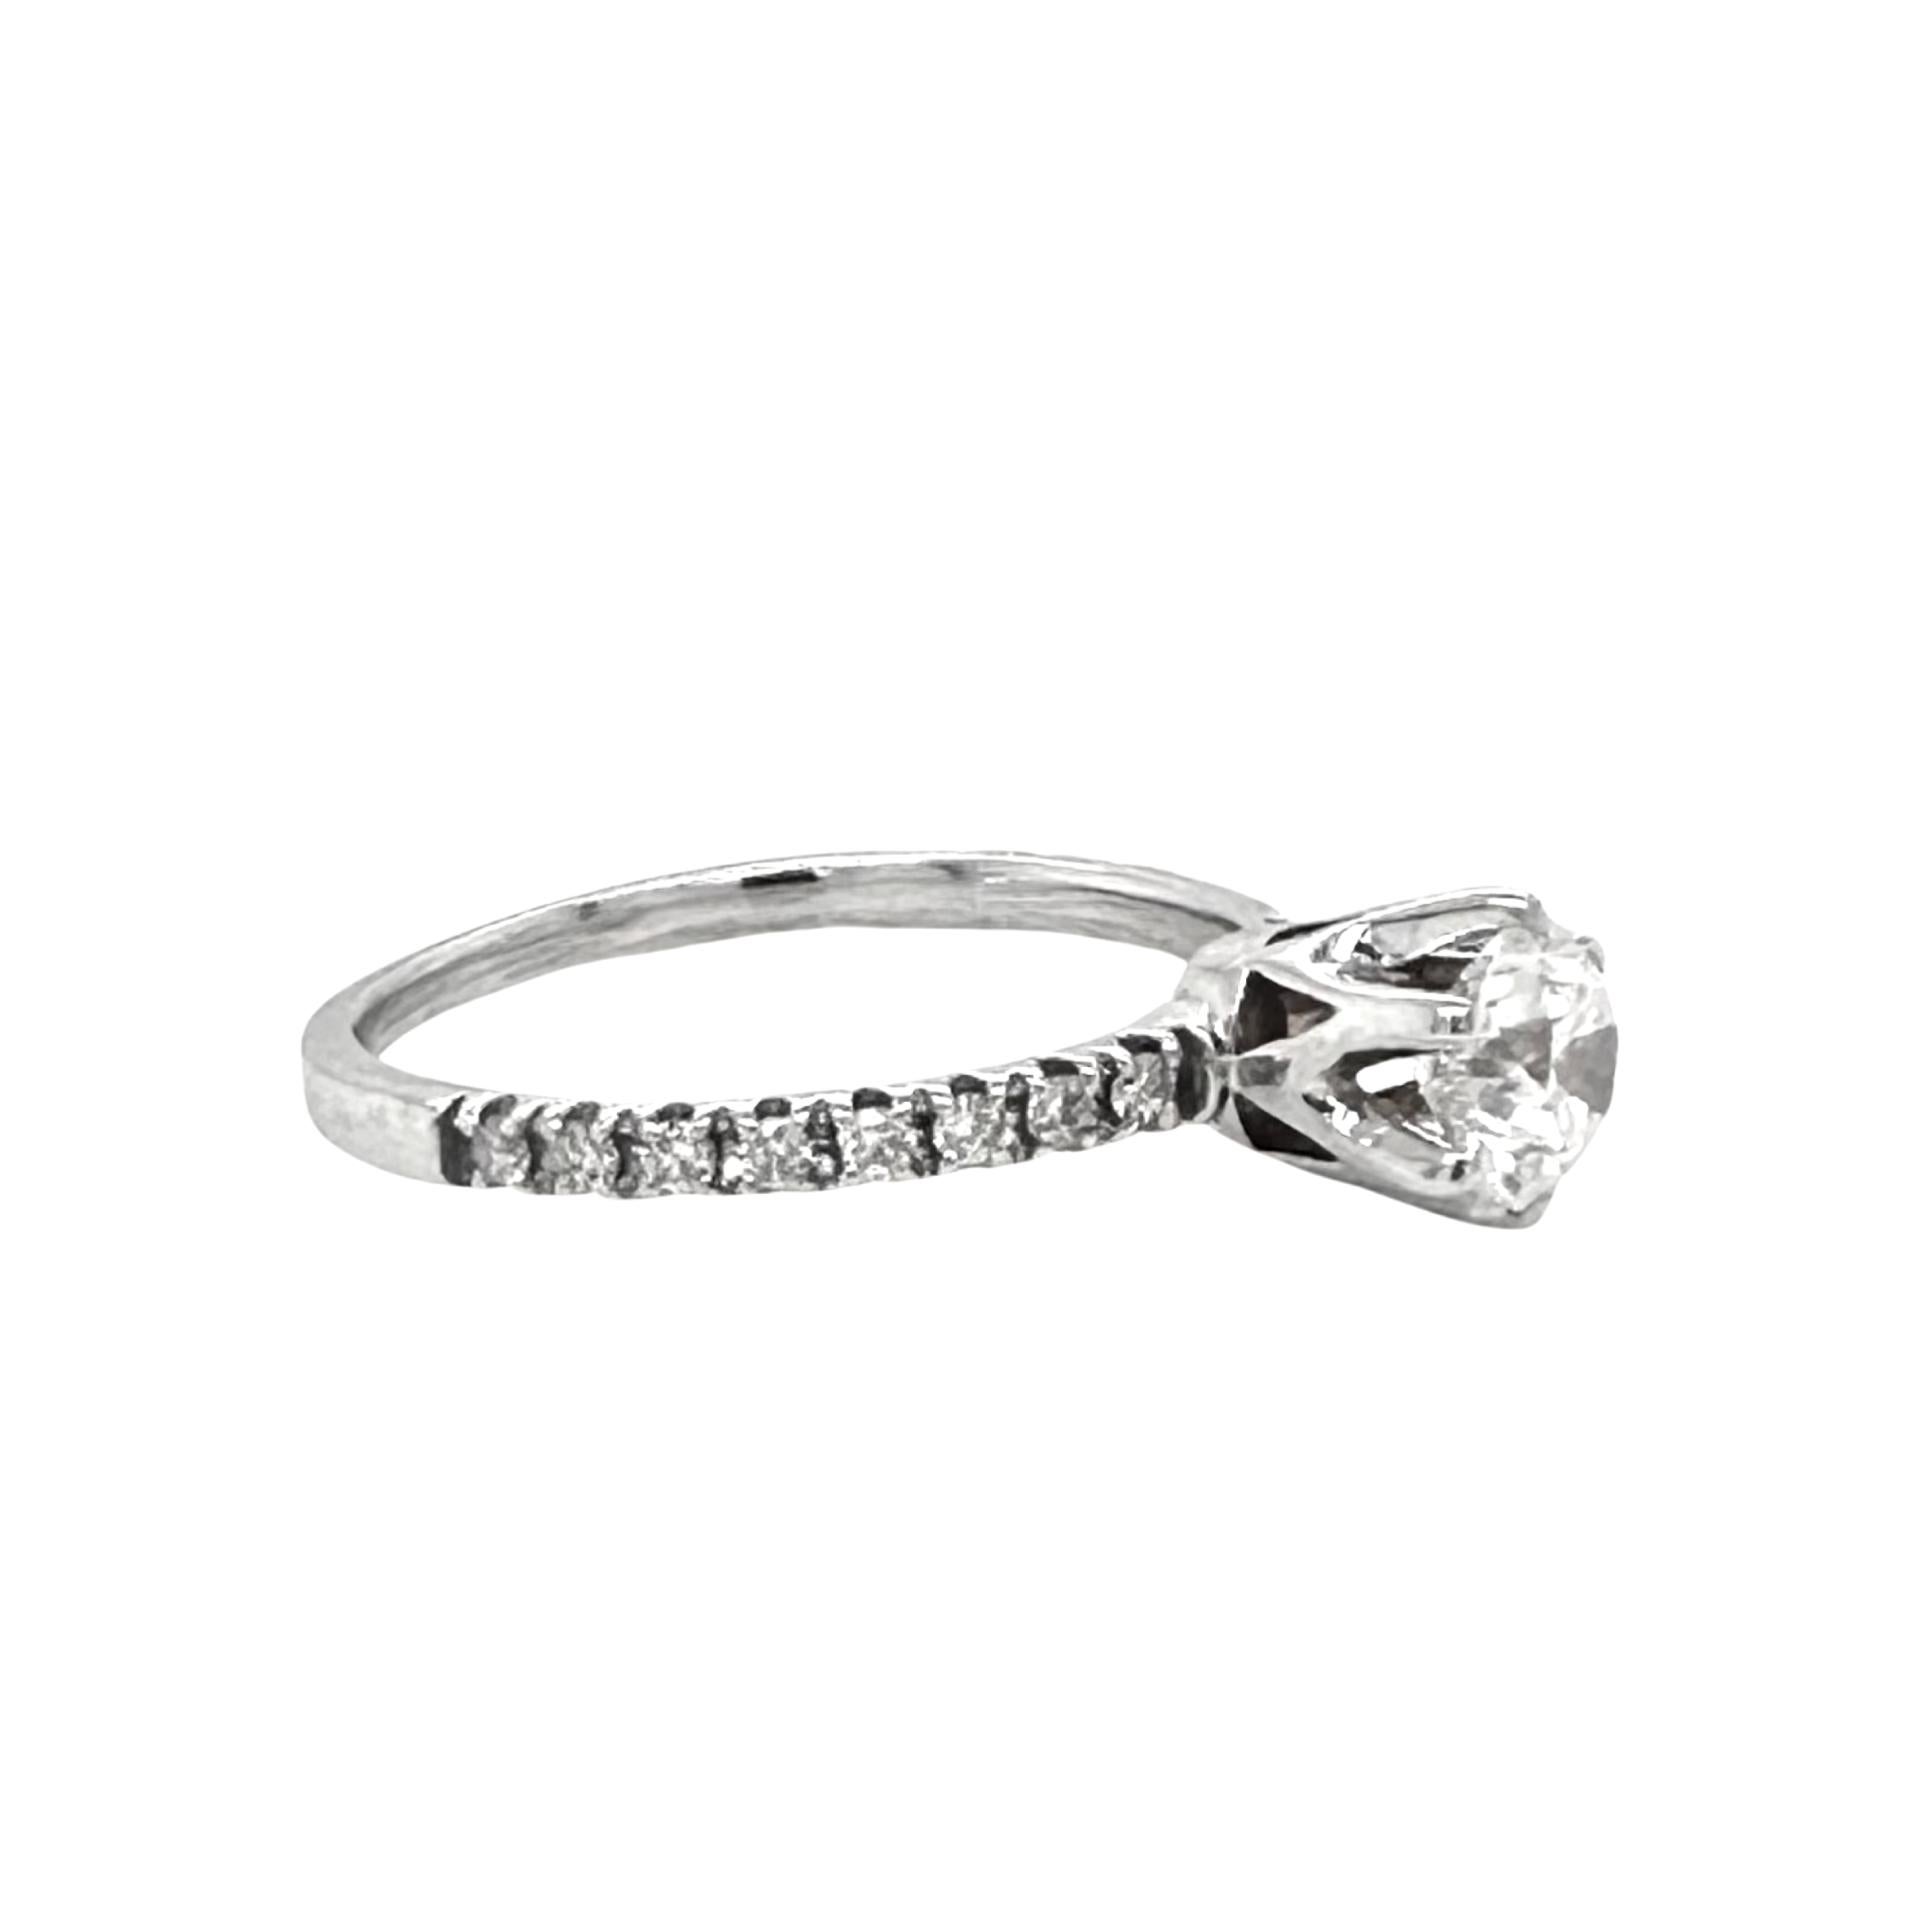 Style: Solitaire Engagement Ring

Metal: White Gold 

Metal Purity: 18K 

​​​​​​​Stones: Diamonds

Diamond Color: E

Diamond Clarity: SI1

Main Stone Carat Weight: 0.5 ct

​​​​​​​Total Carat Weight: 0.644 ct​​​​​​​

Ring Size: 4.5